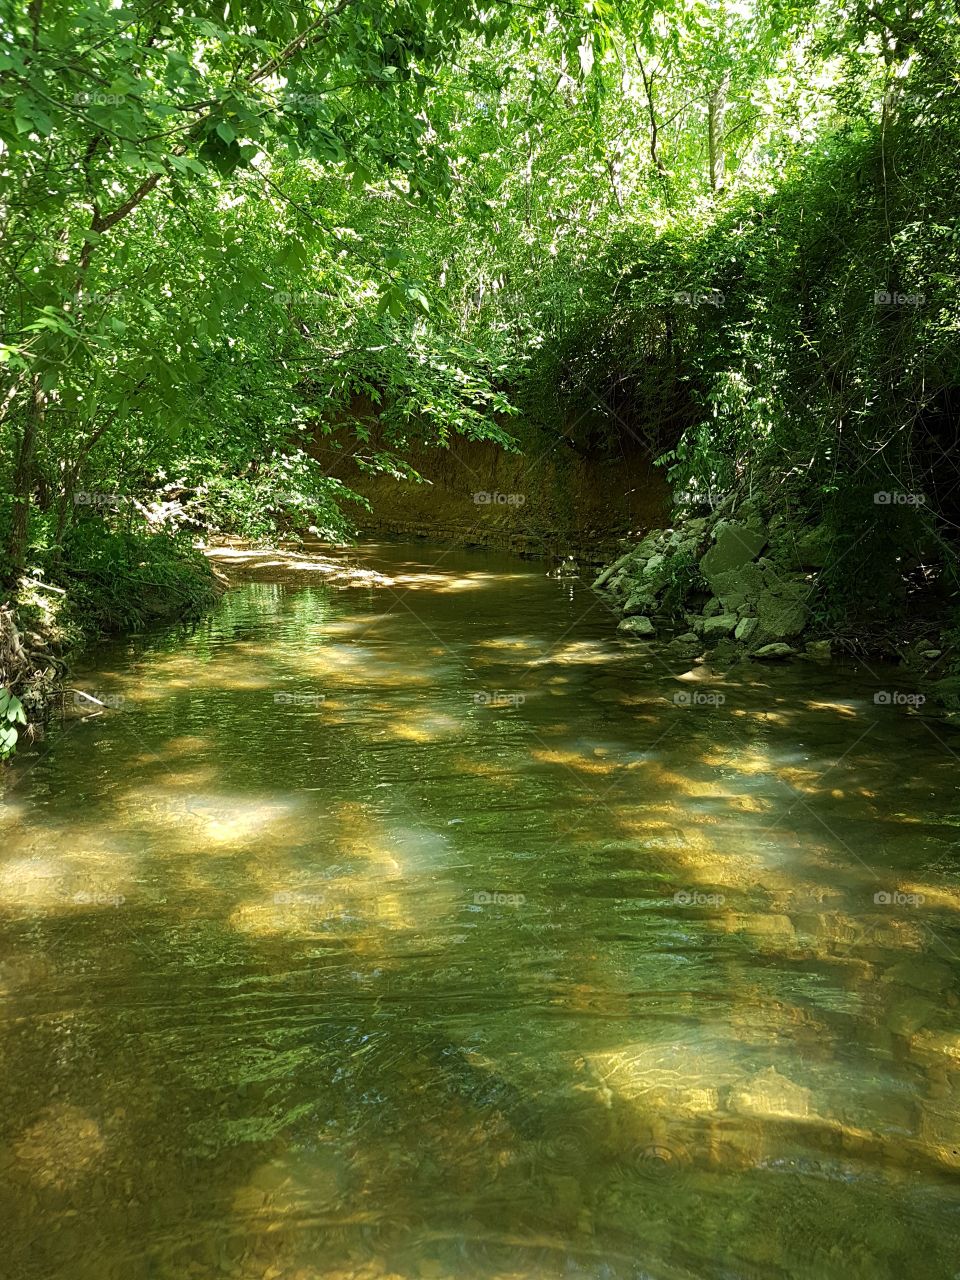 Dappled sunlight filtering through green leaves onto creek with flowing water over Brown rocks